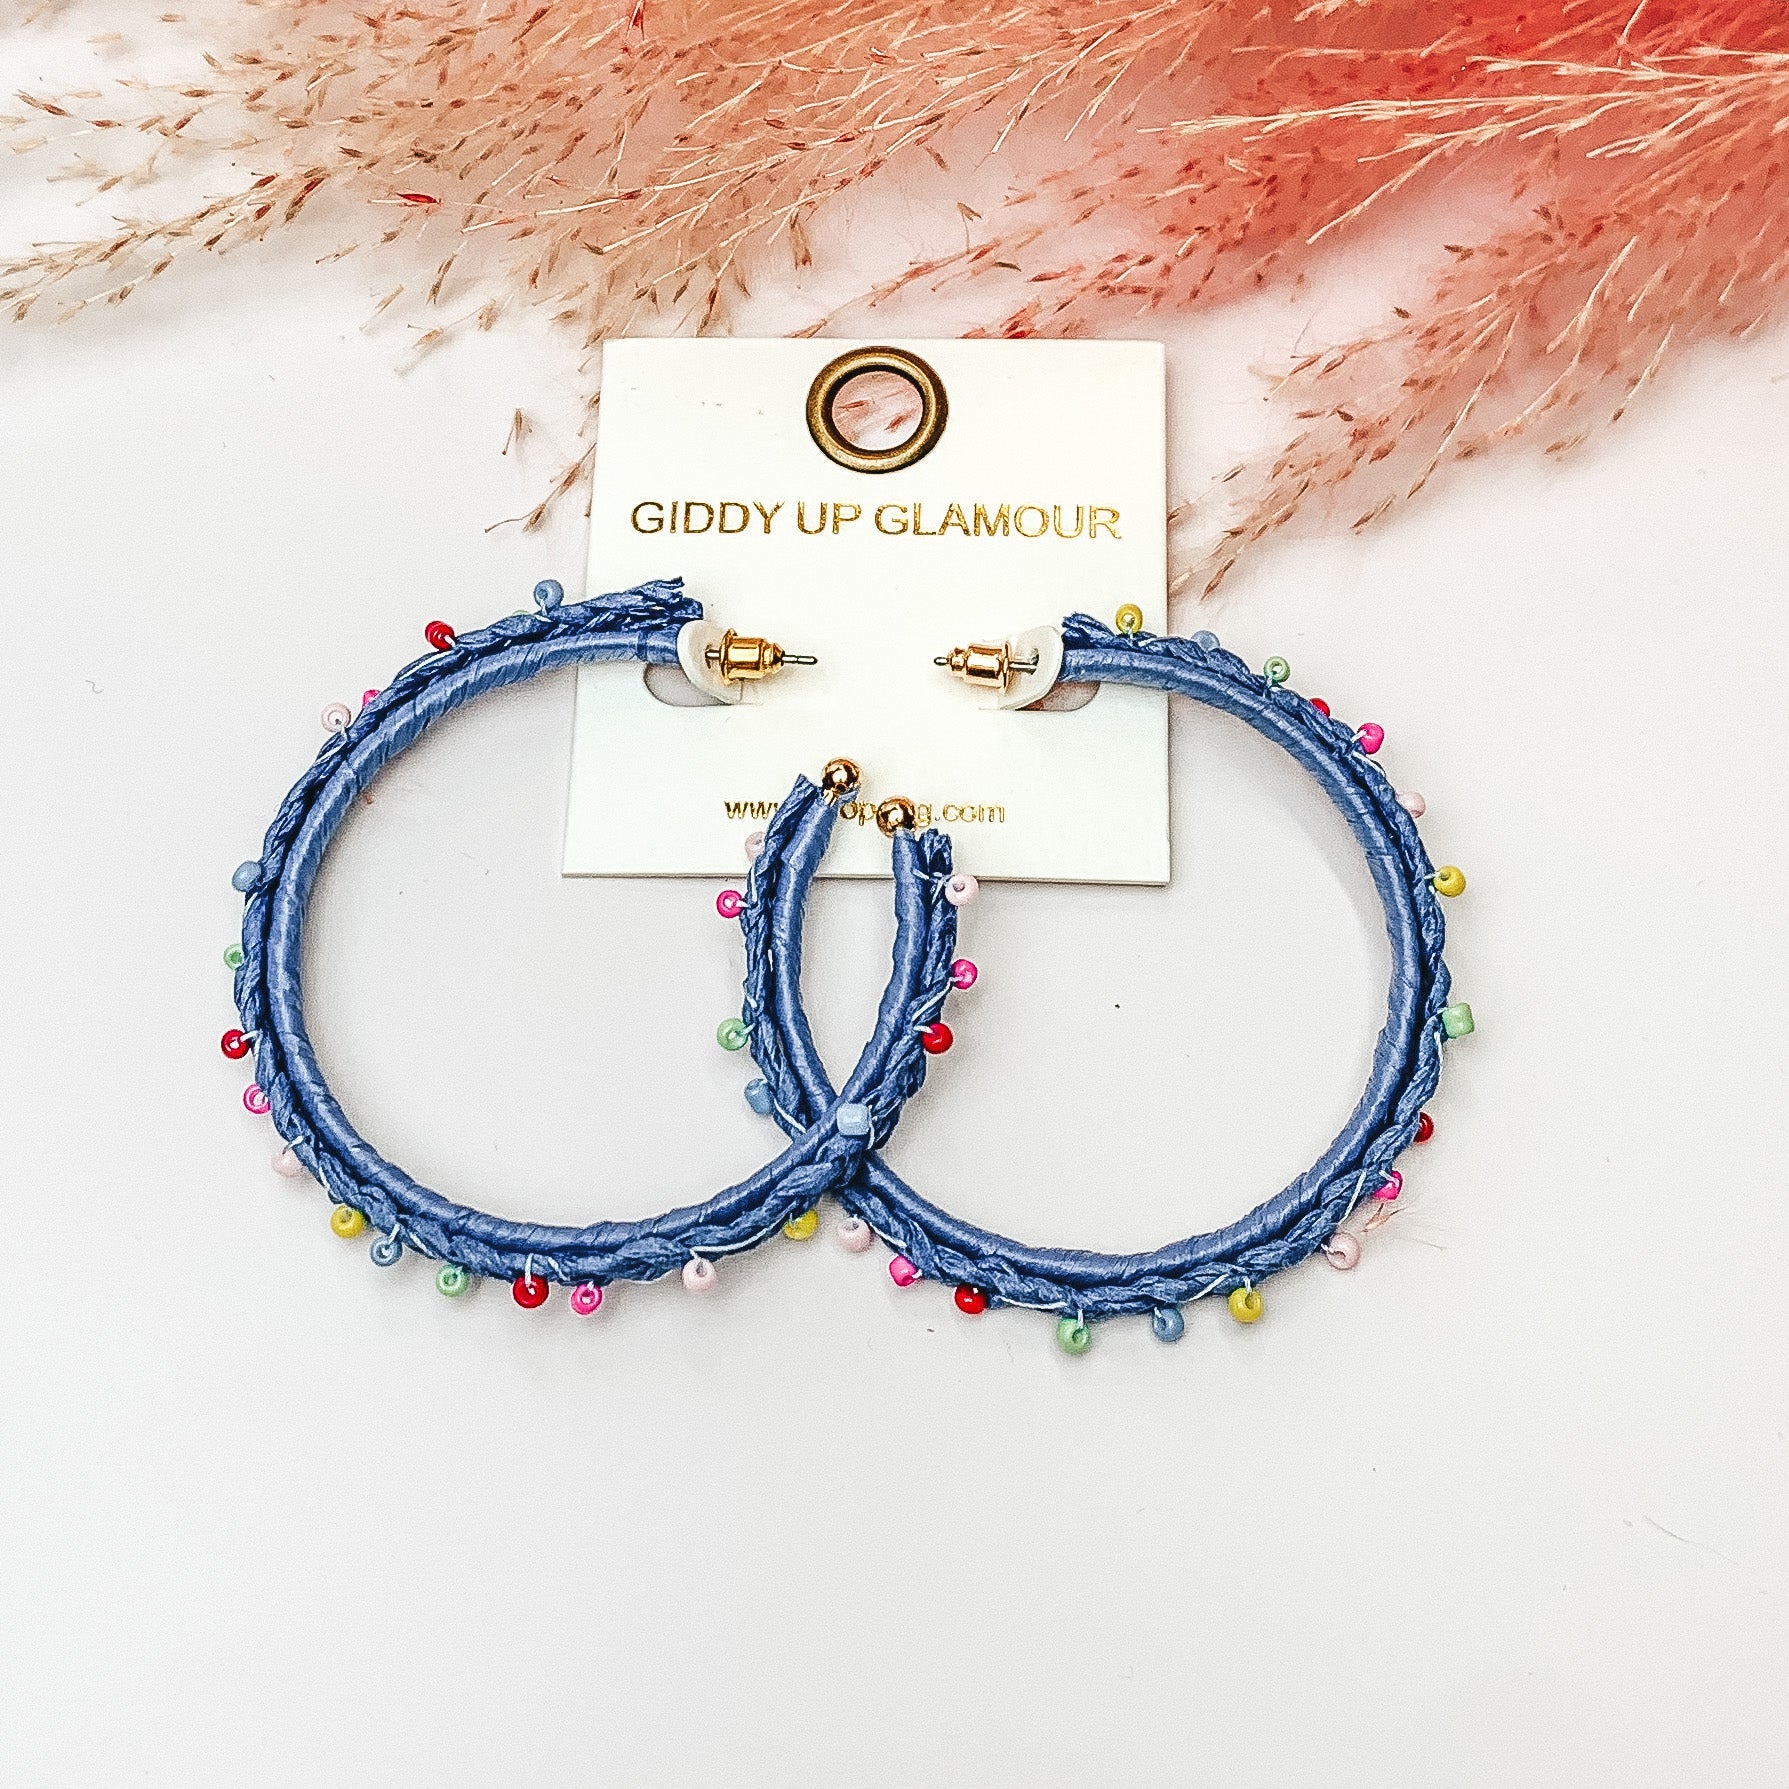 Pictured are raffia braided hoop earrings in blue with colorful beads. They are pictured with a pink feather on a white background.